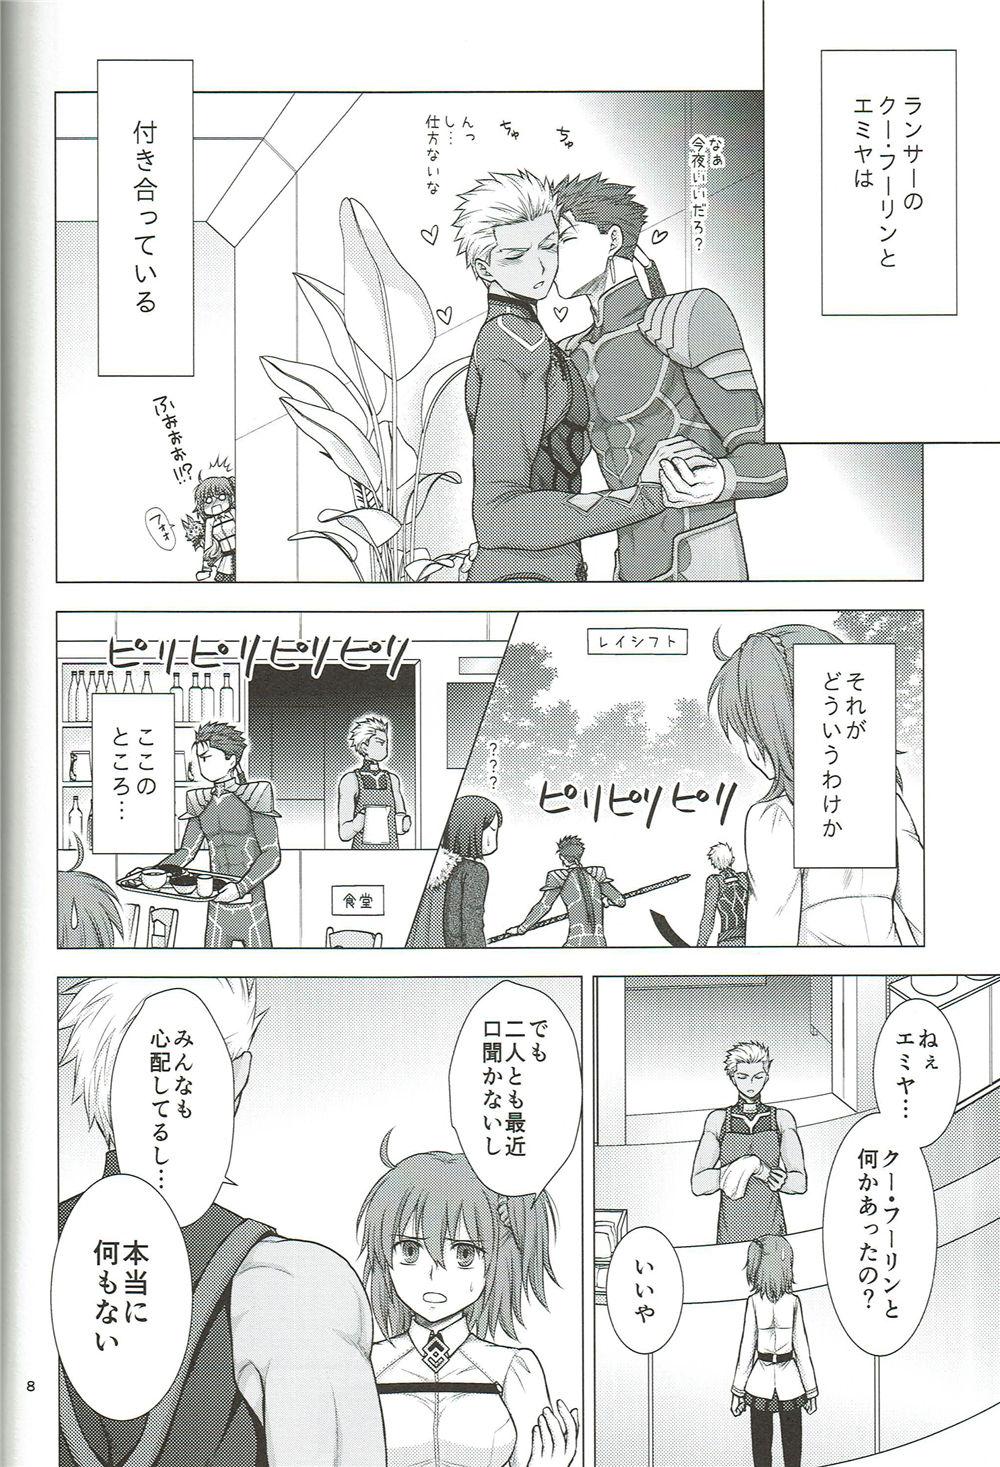 Shot 【屋井坂】EXIT - Fate grand order Police - Page 9